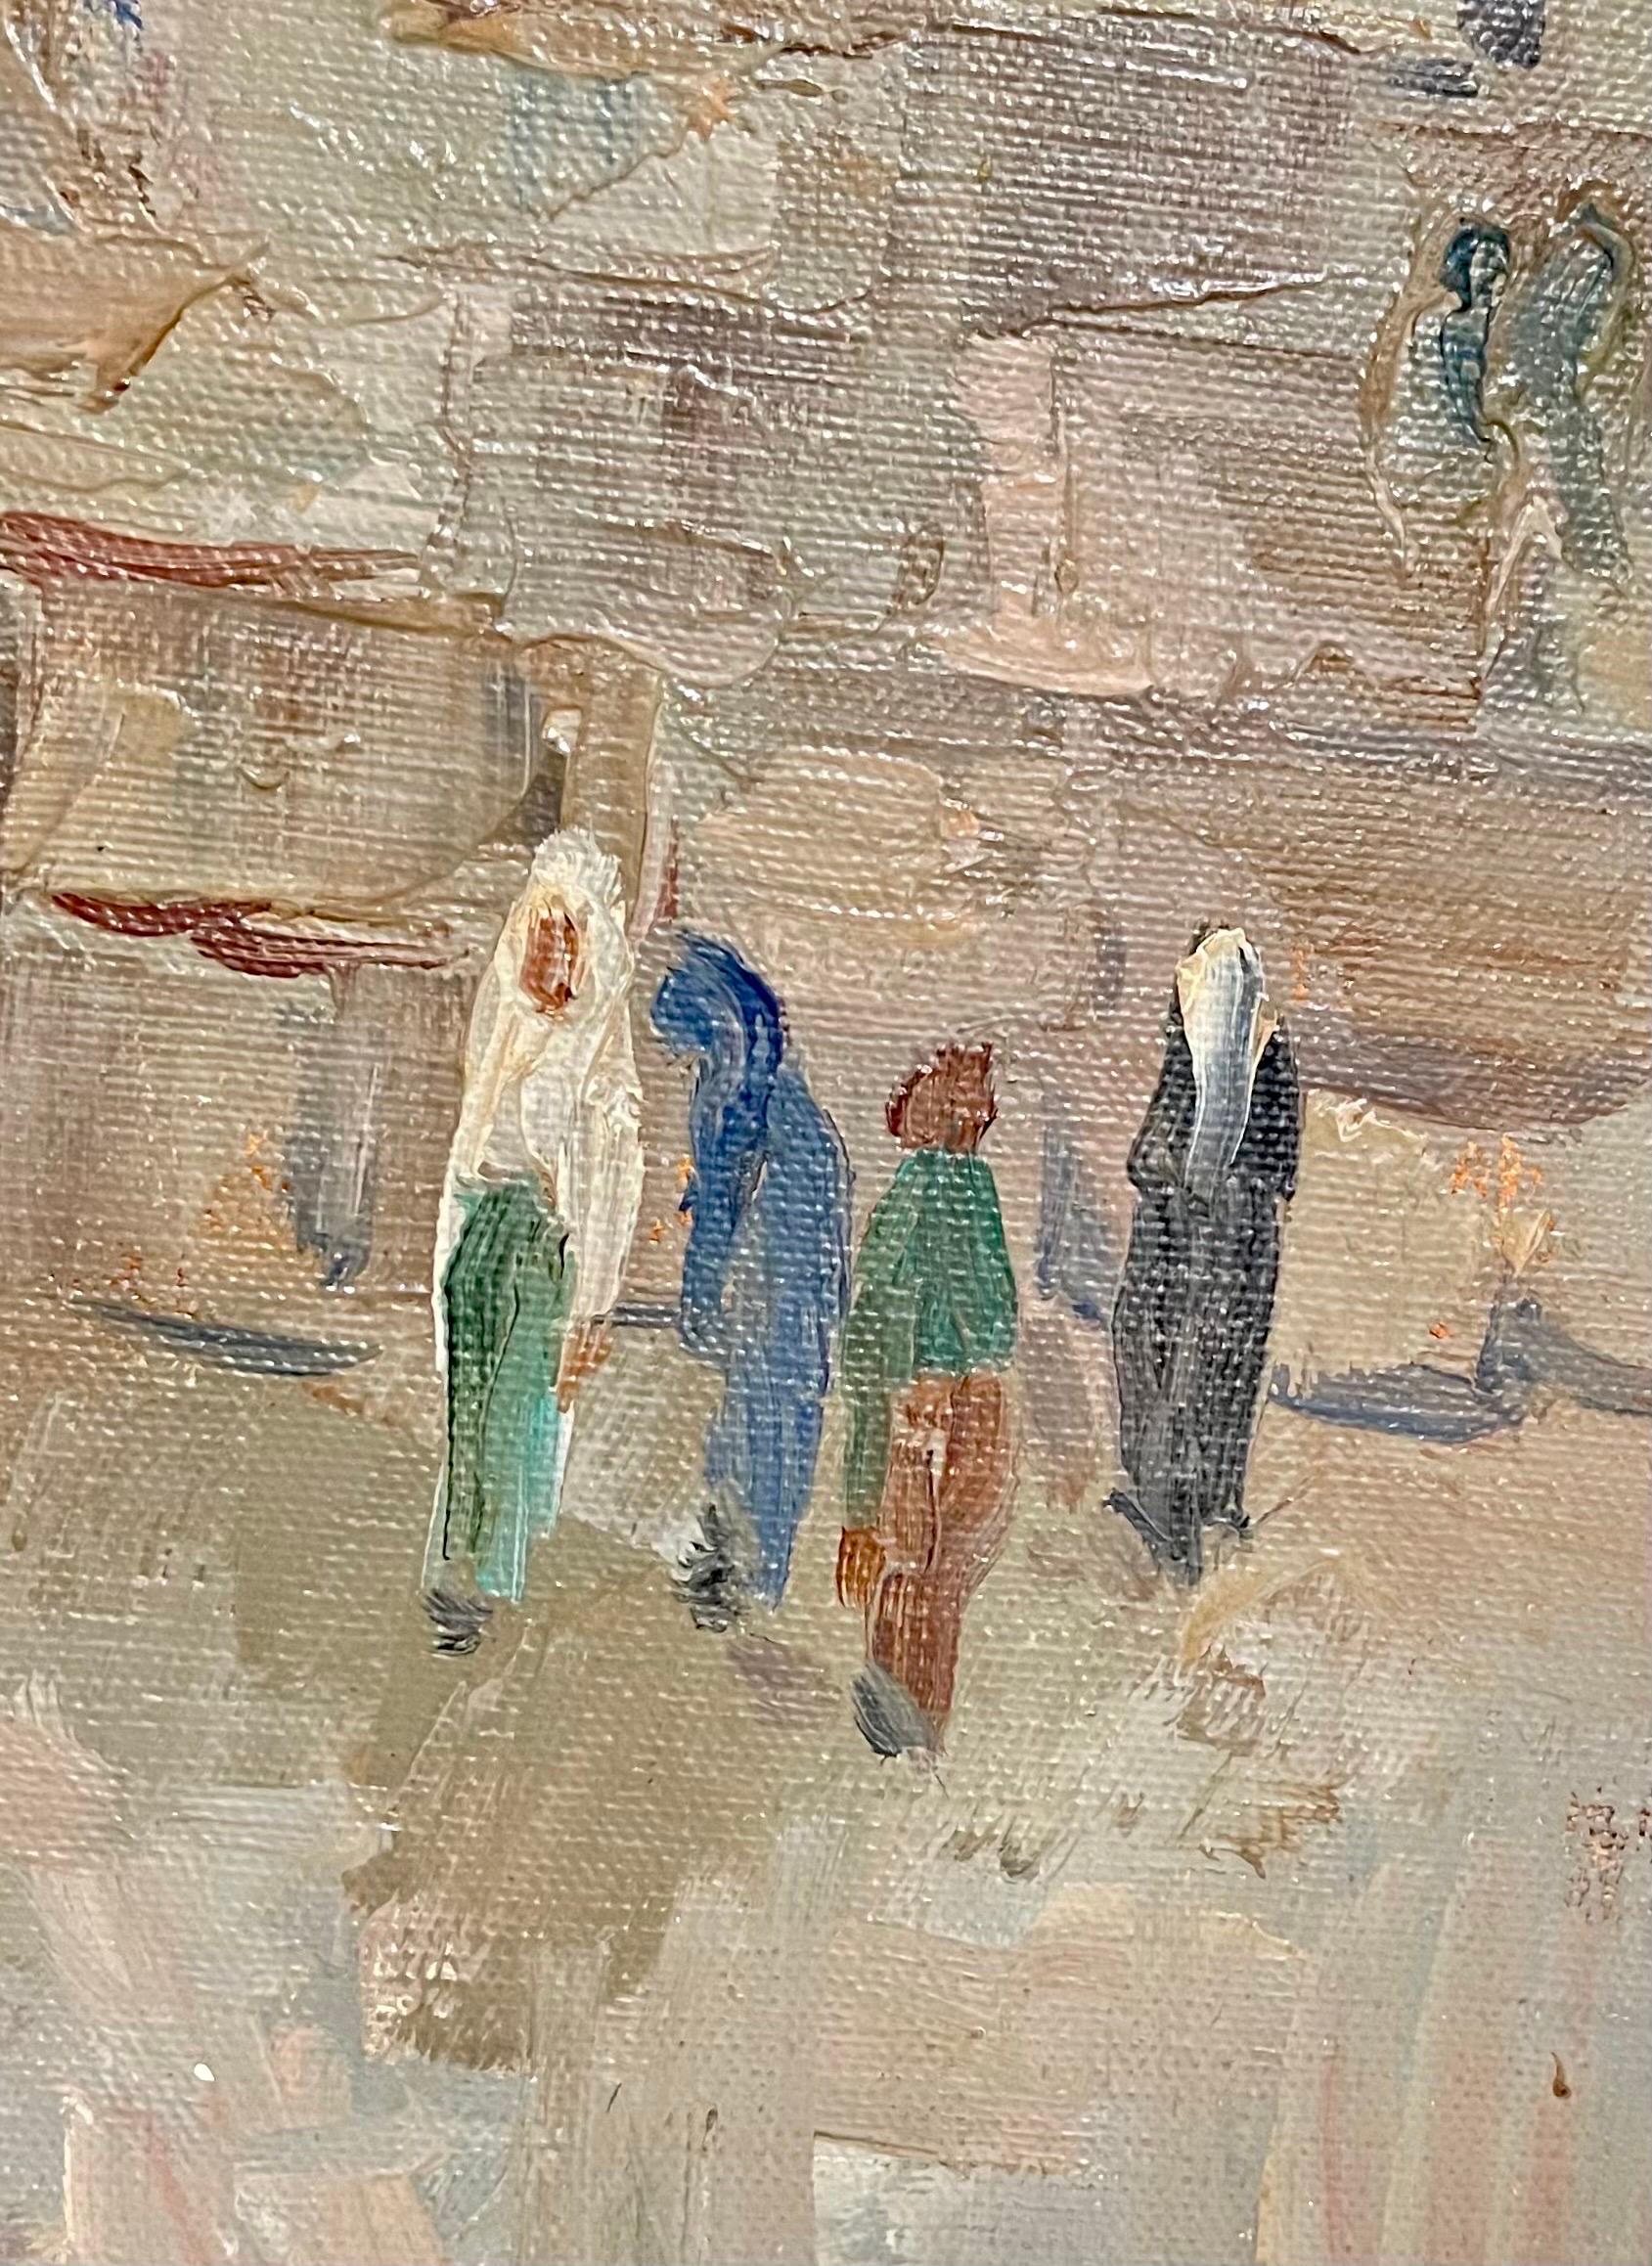 

Broshi (Brodetz) Yoseph (Lehi alias Uriel) 1913- 1980 Russian Israeli artist.
An oil painting depicting Jewish people praying at the Western Wall or Wailing Wall in the Old City of Jerusalem, also known as the Kotel, the holiest place for the